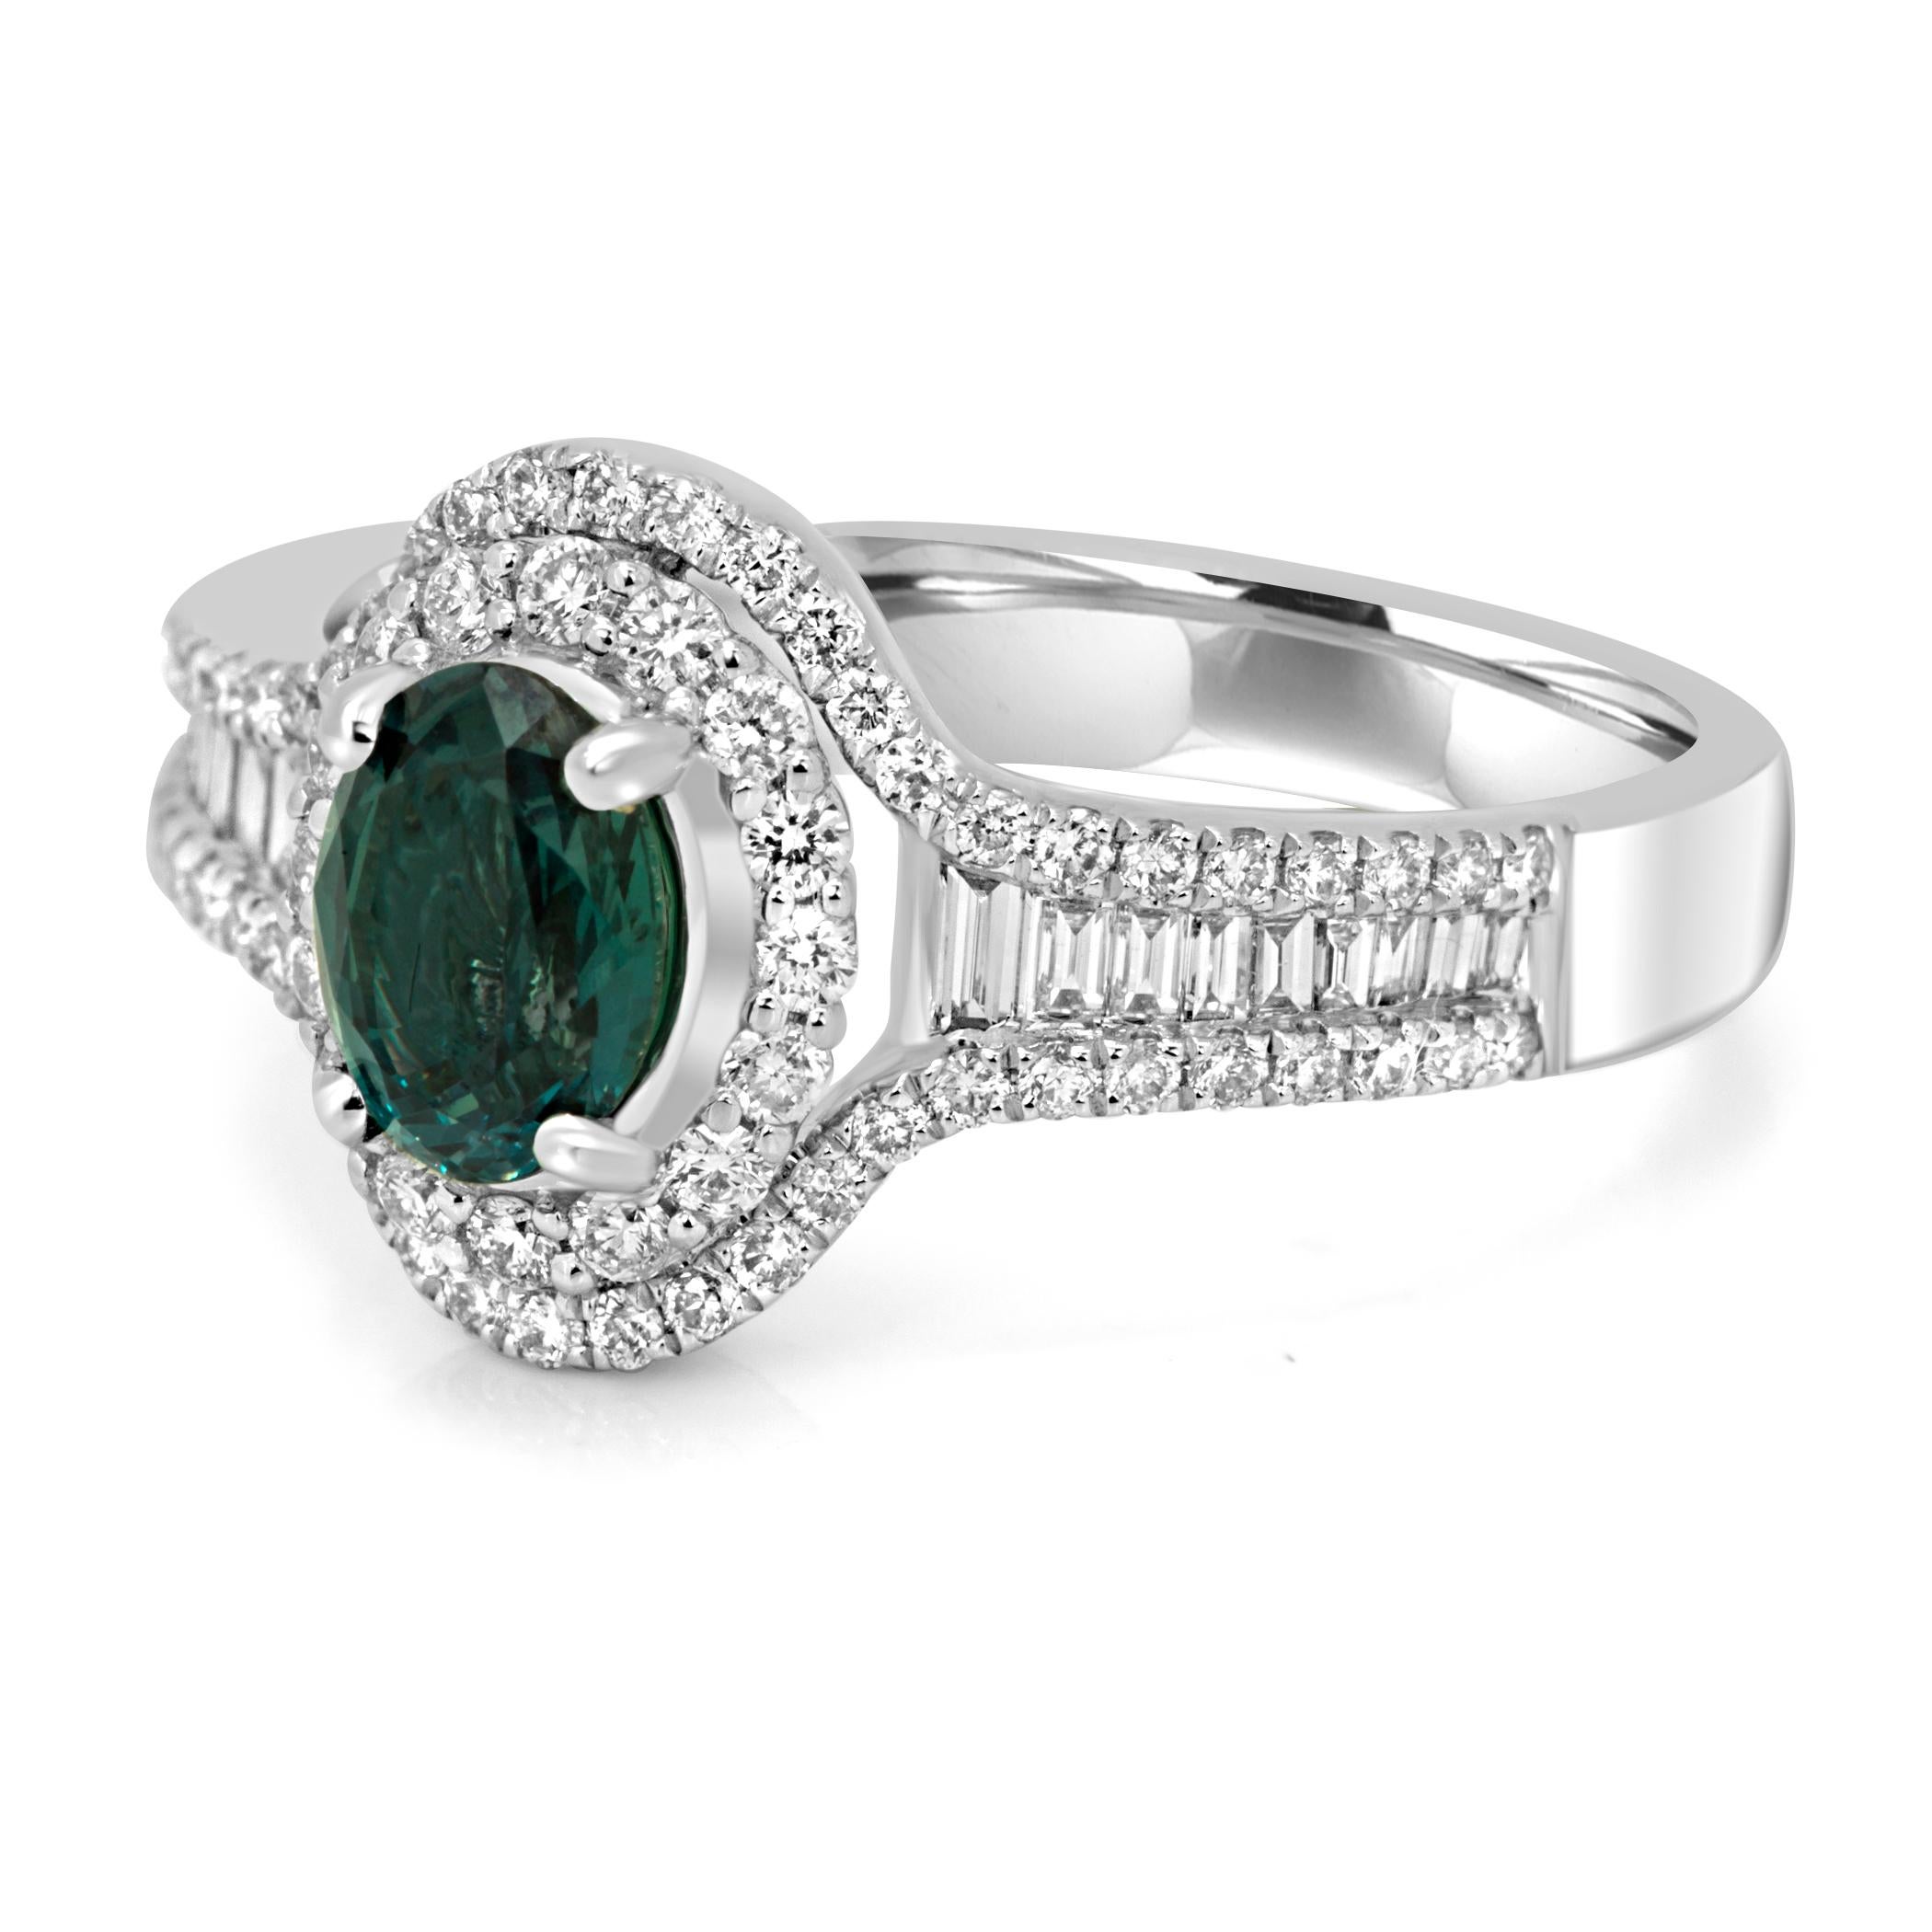 At the heart of this exquisite ring lies a captivating Alexandrite Oval, meticulously chosen for its impressive size and its remarkable color-changing properties. With a weight of 0.76 carats, this Alexandrite's magnificent lush green hues creates